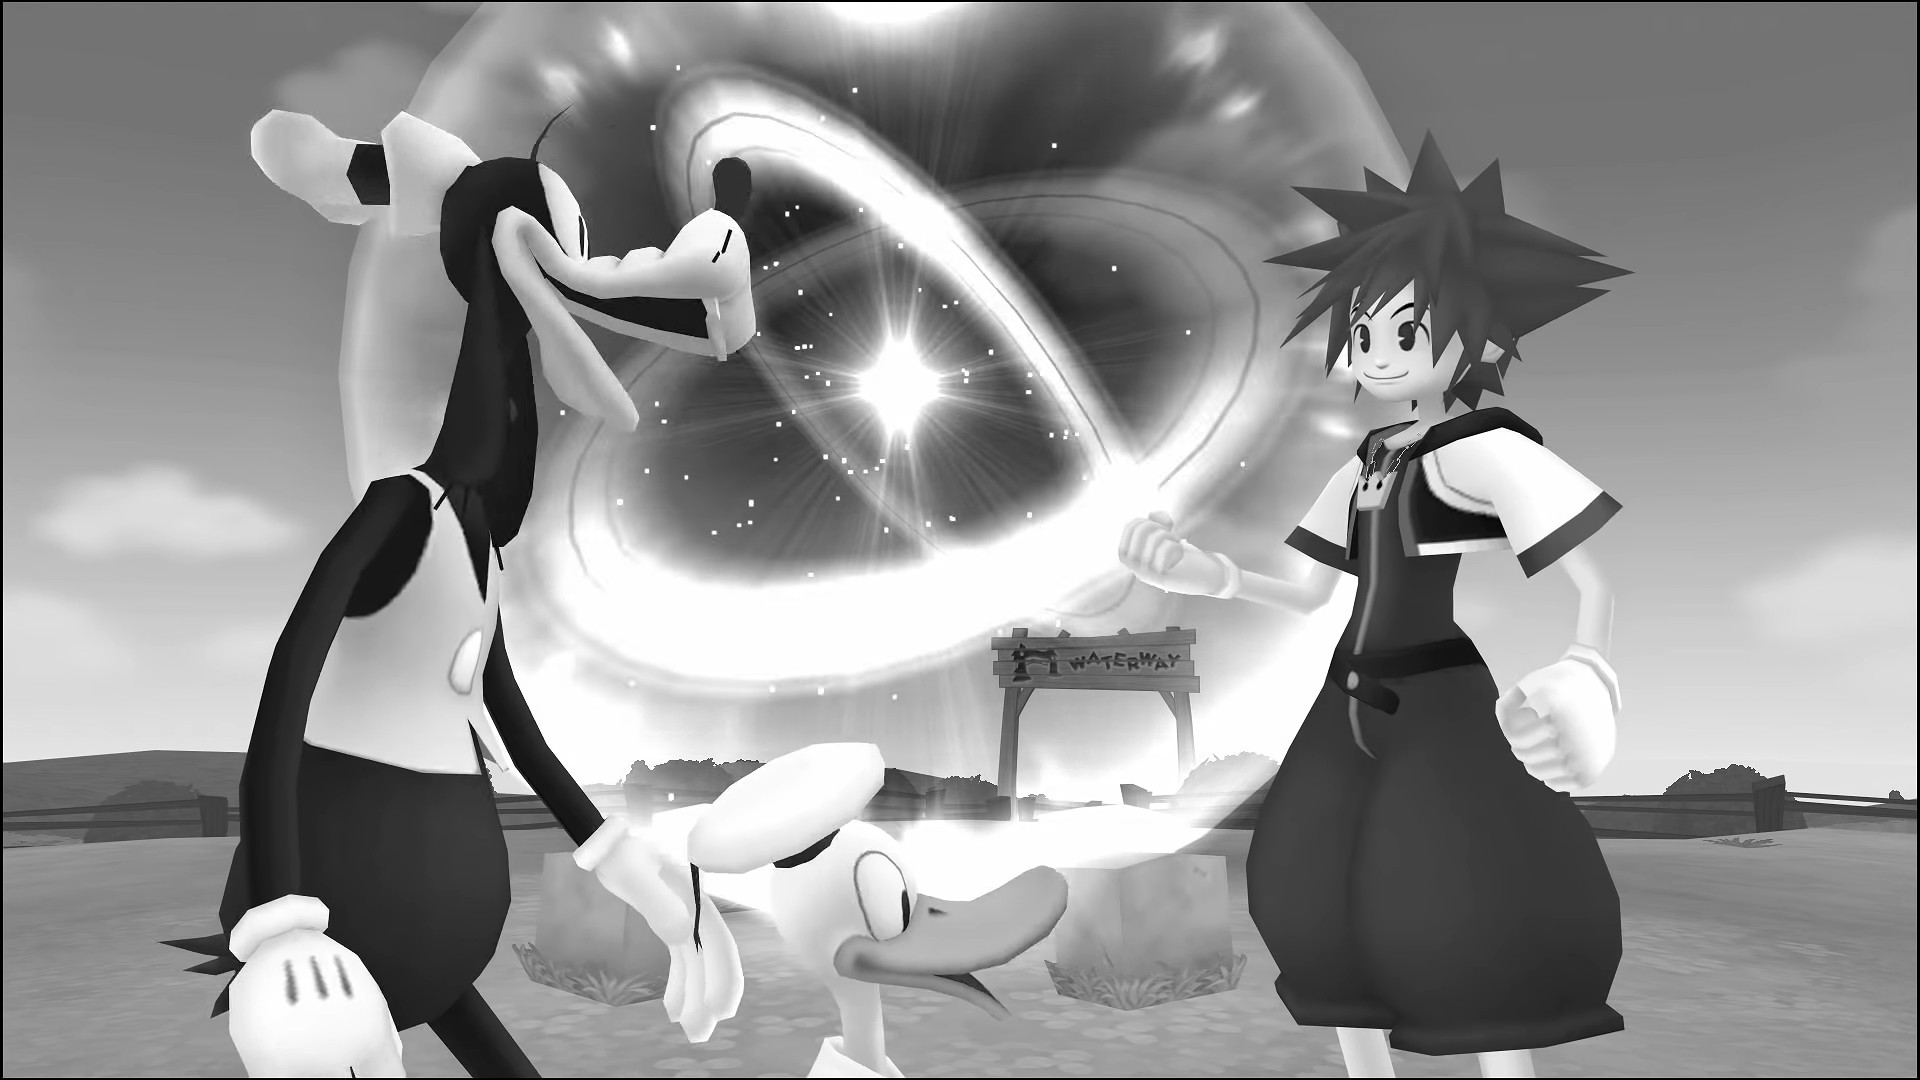 "Kingdom Hearts II". 2007. Square Enix. Disney. Sora, Donald, and Goofy stand before the Cornerstone of Light in Timeless River.